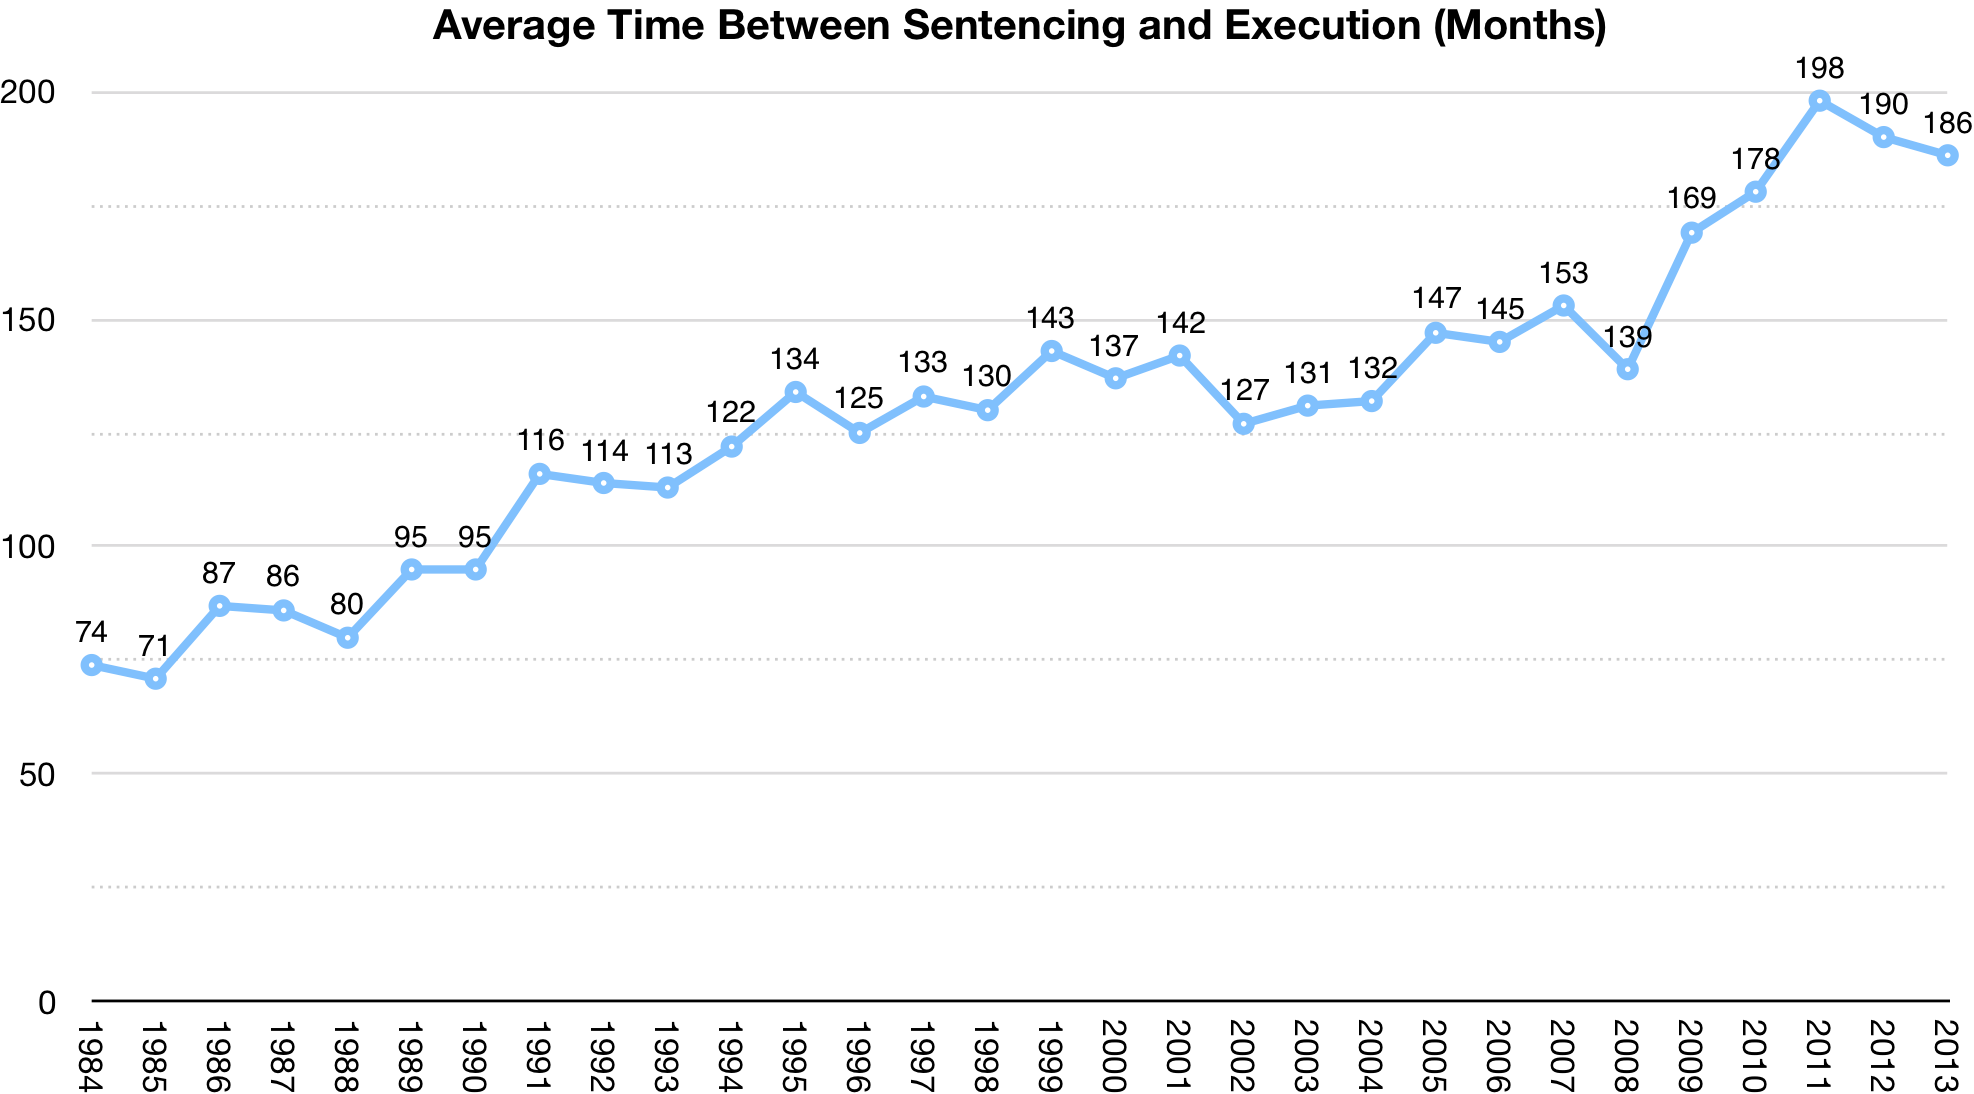 time on death row | death penalty information center